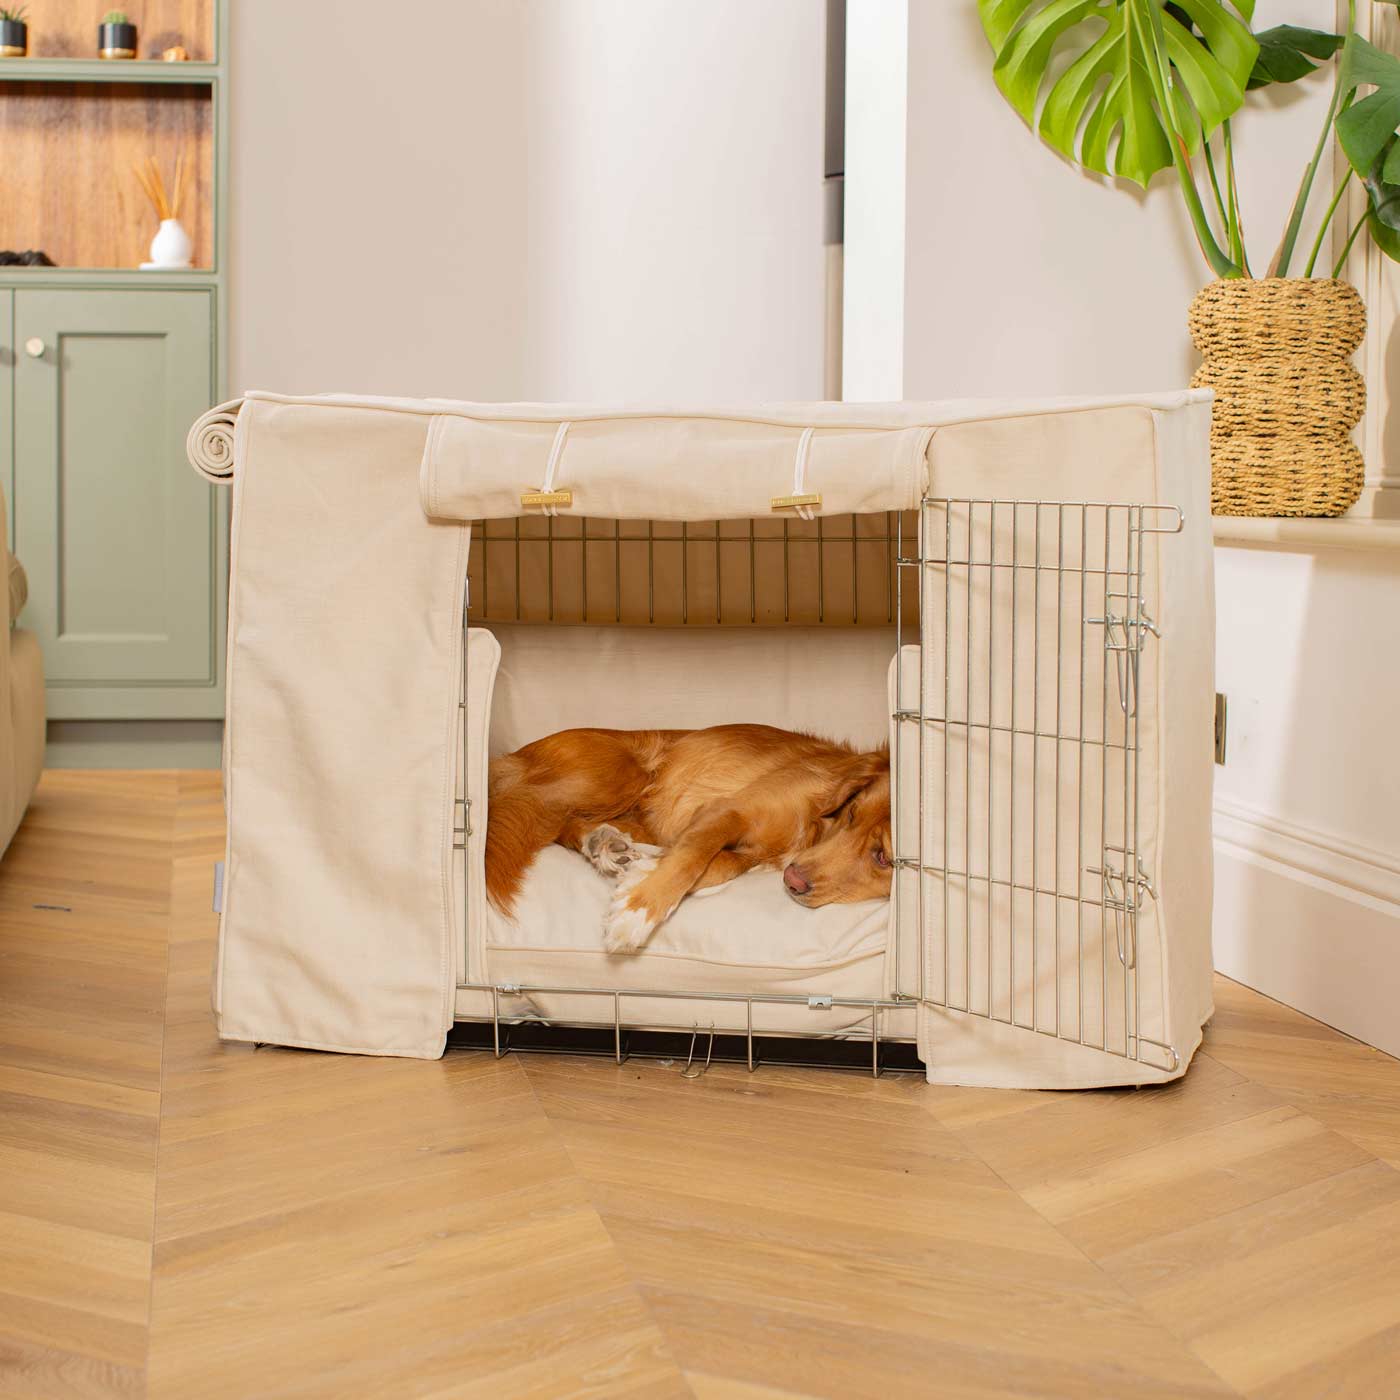 Luxury Heavy Duty Dog Crate, In Stunning Savanna Bone Crate Set, The Perfect Dog Crate Set For Building The Ultimate Pet Den! Dog Crate Cover Available To Personalise at Lords & Labradors